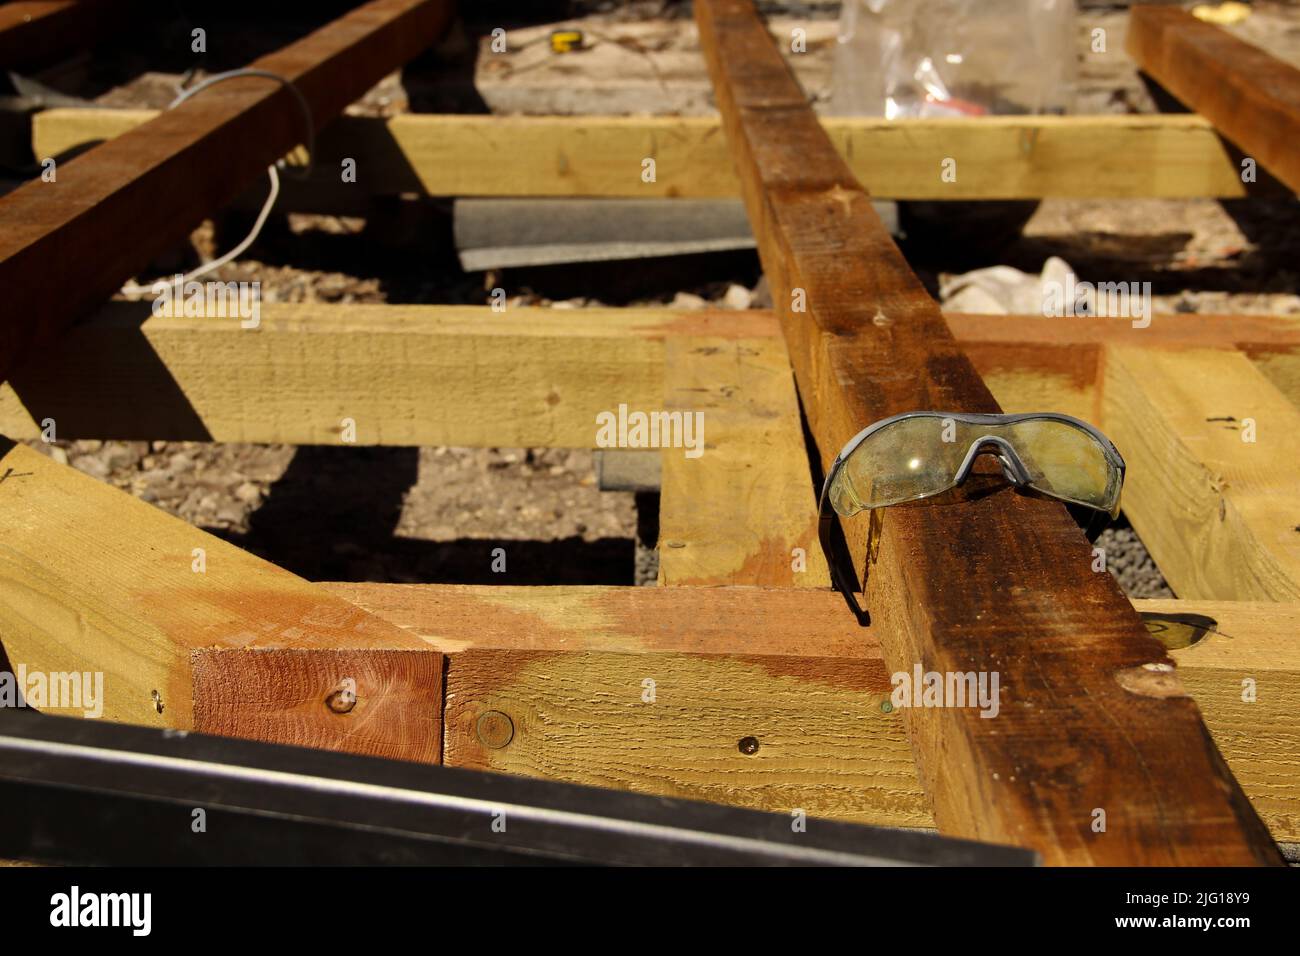 Plastic safety glasses. Used safety goggles lying on a beam. Stock Photo